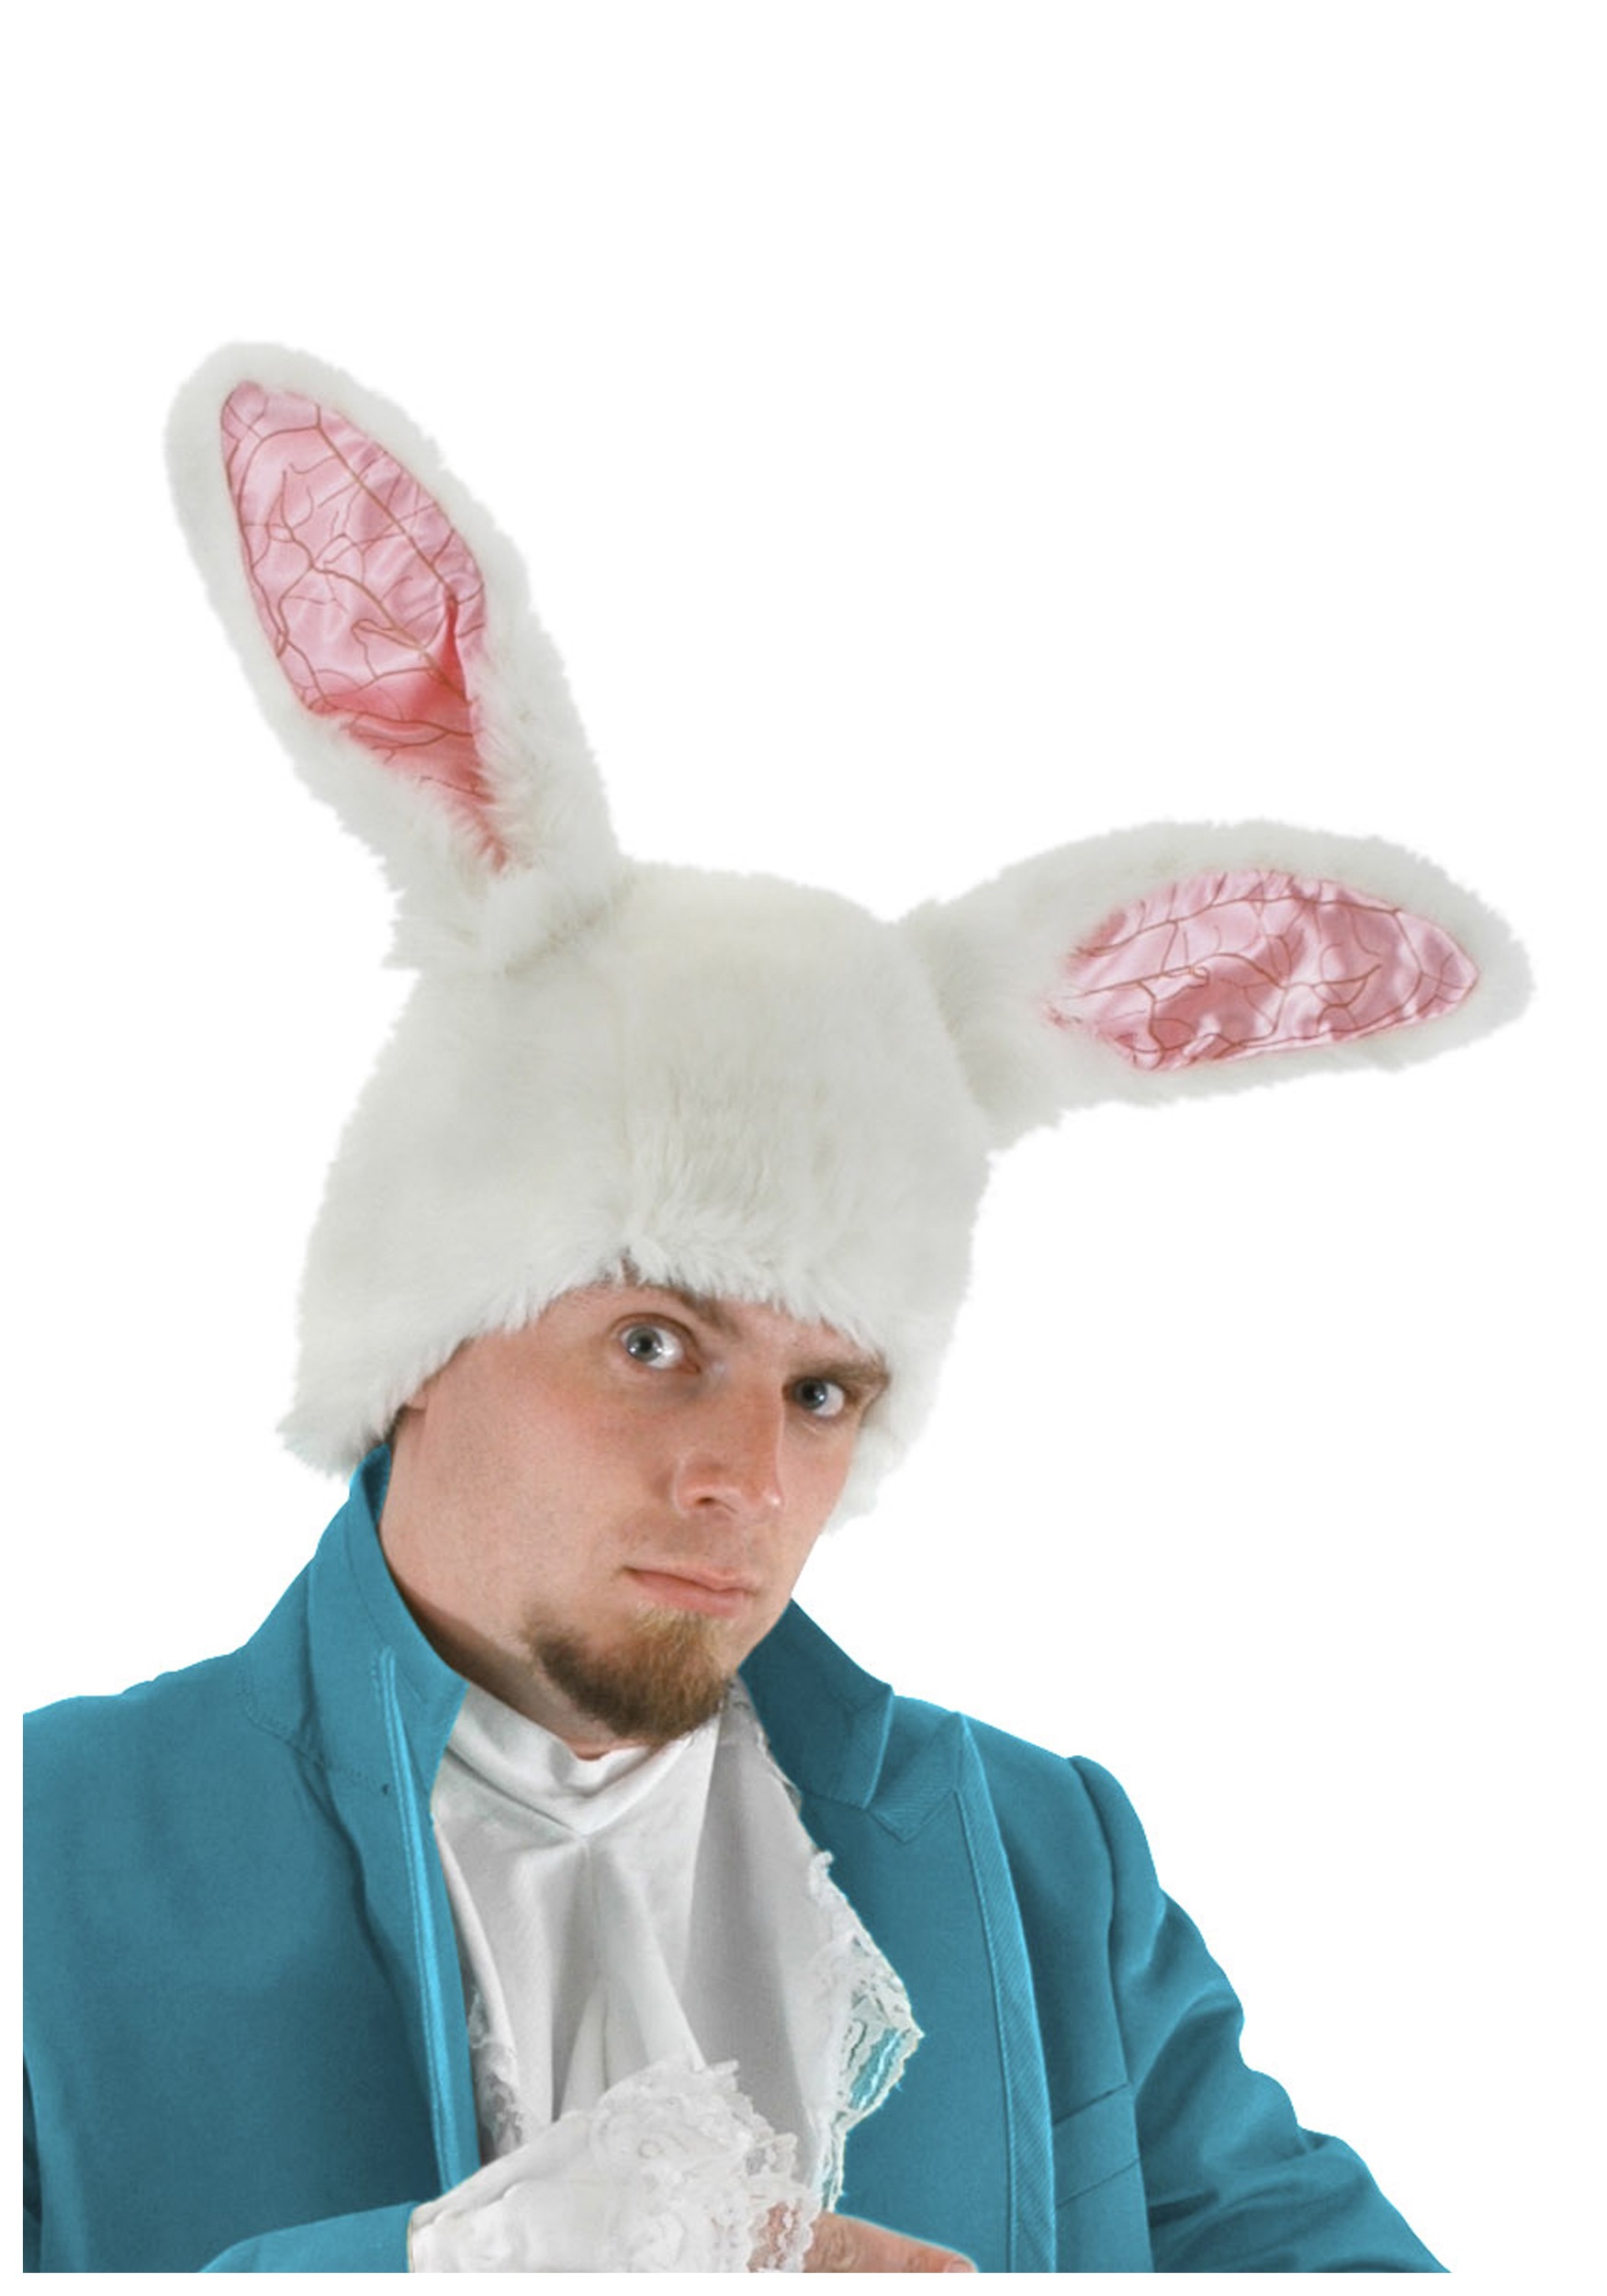 White Rabbit Ears Costume Hat for Adults